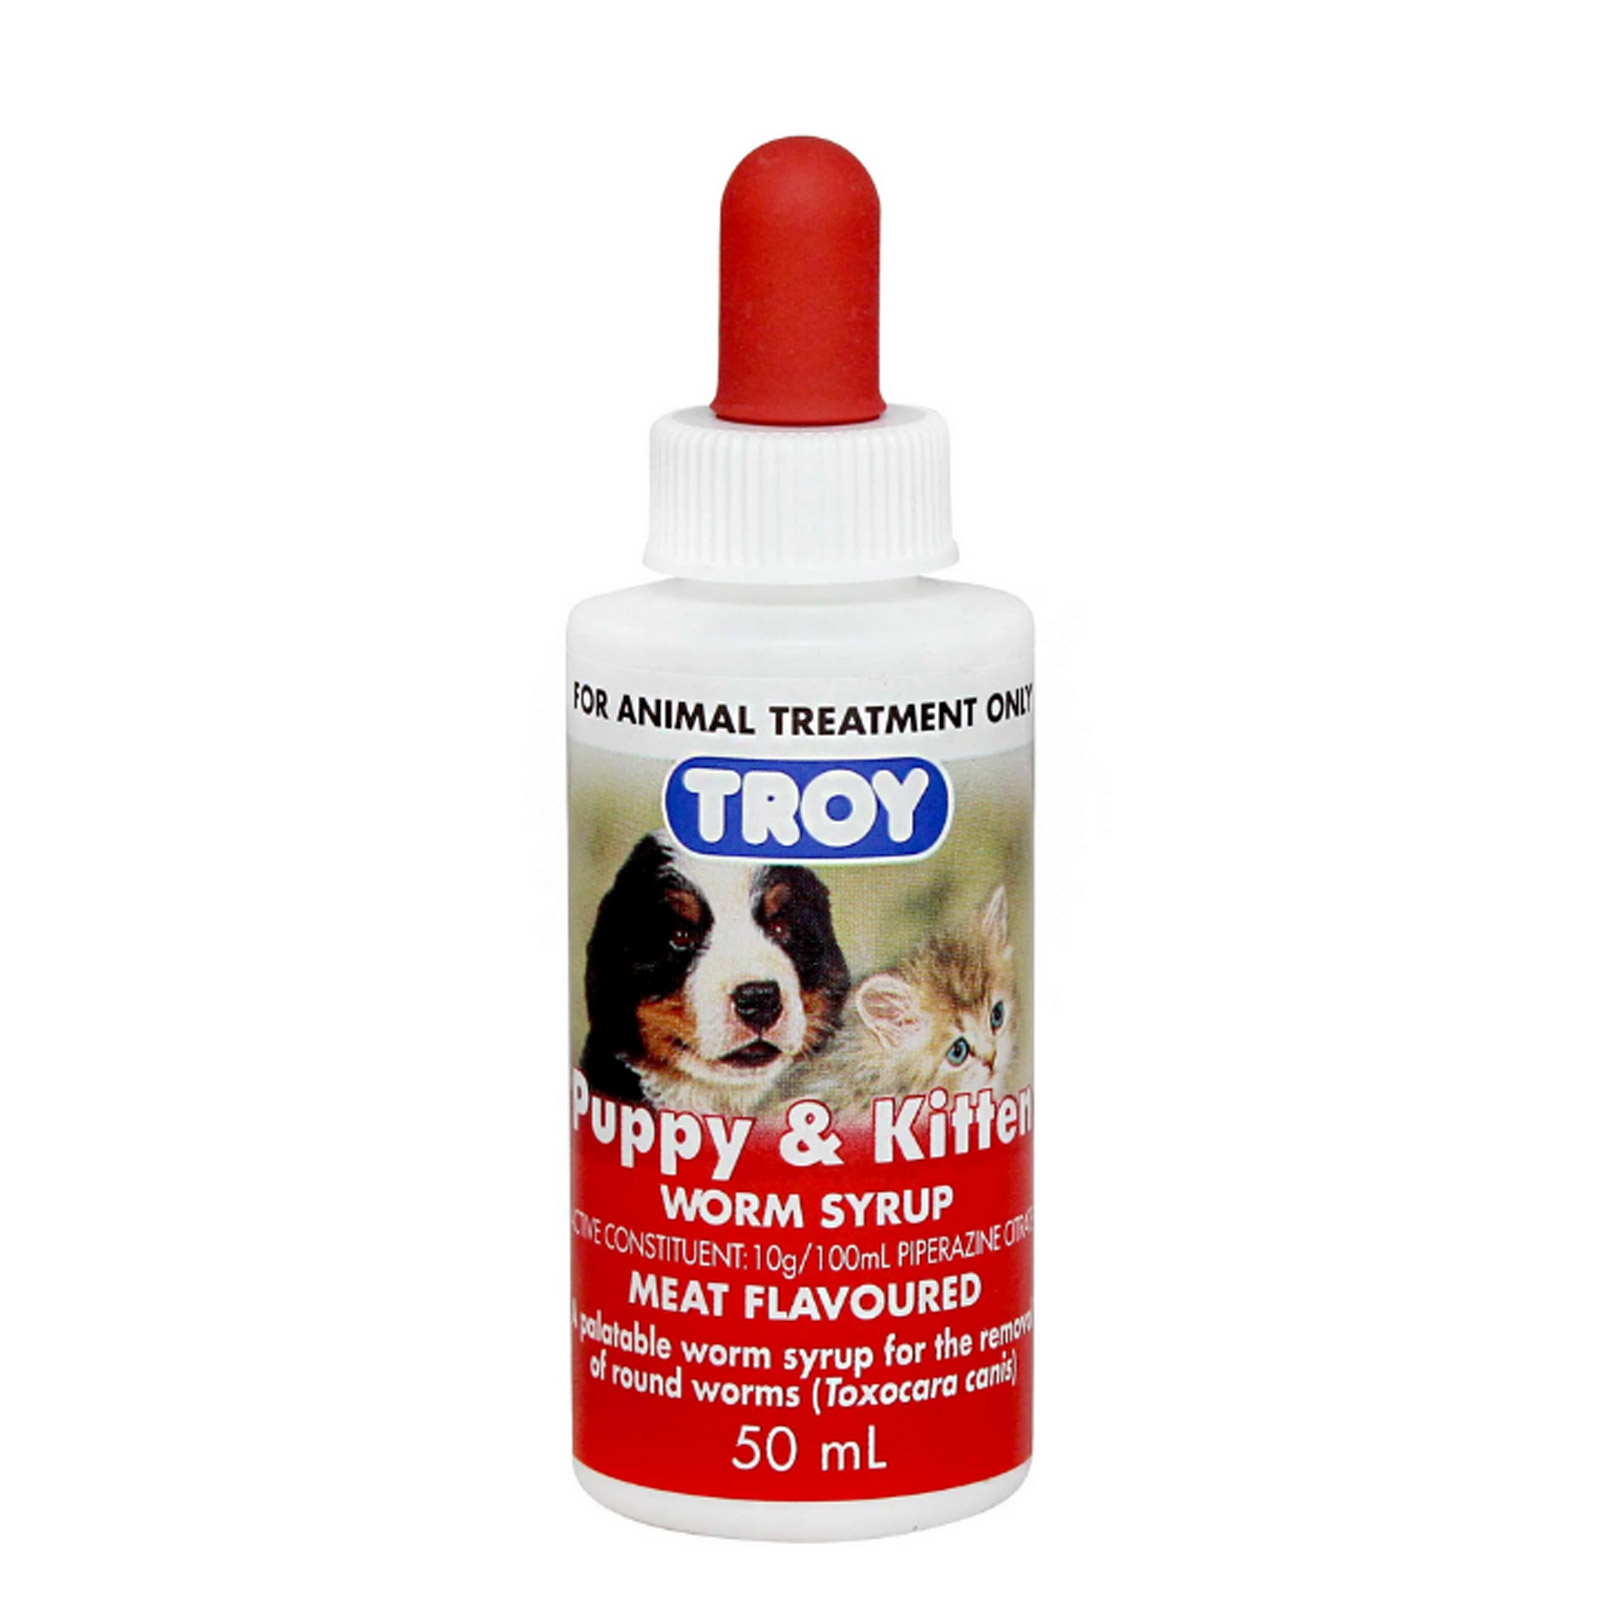 Troy Puppy & Kitten Worming Syrup for Dogs